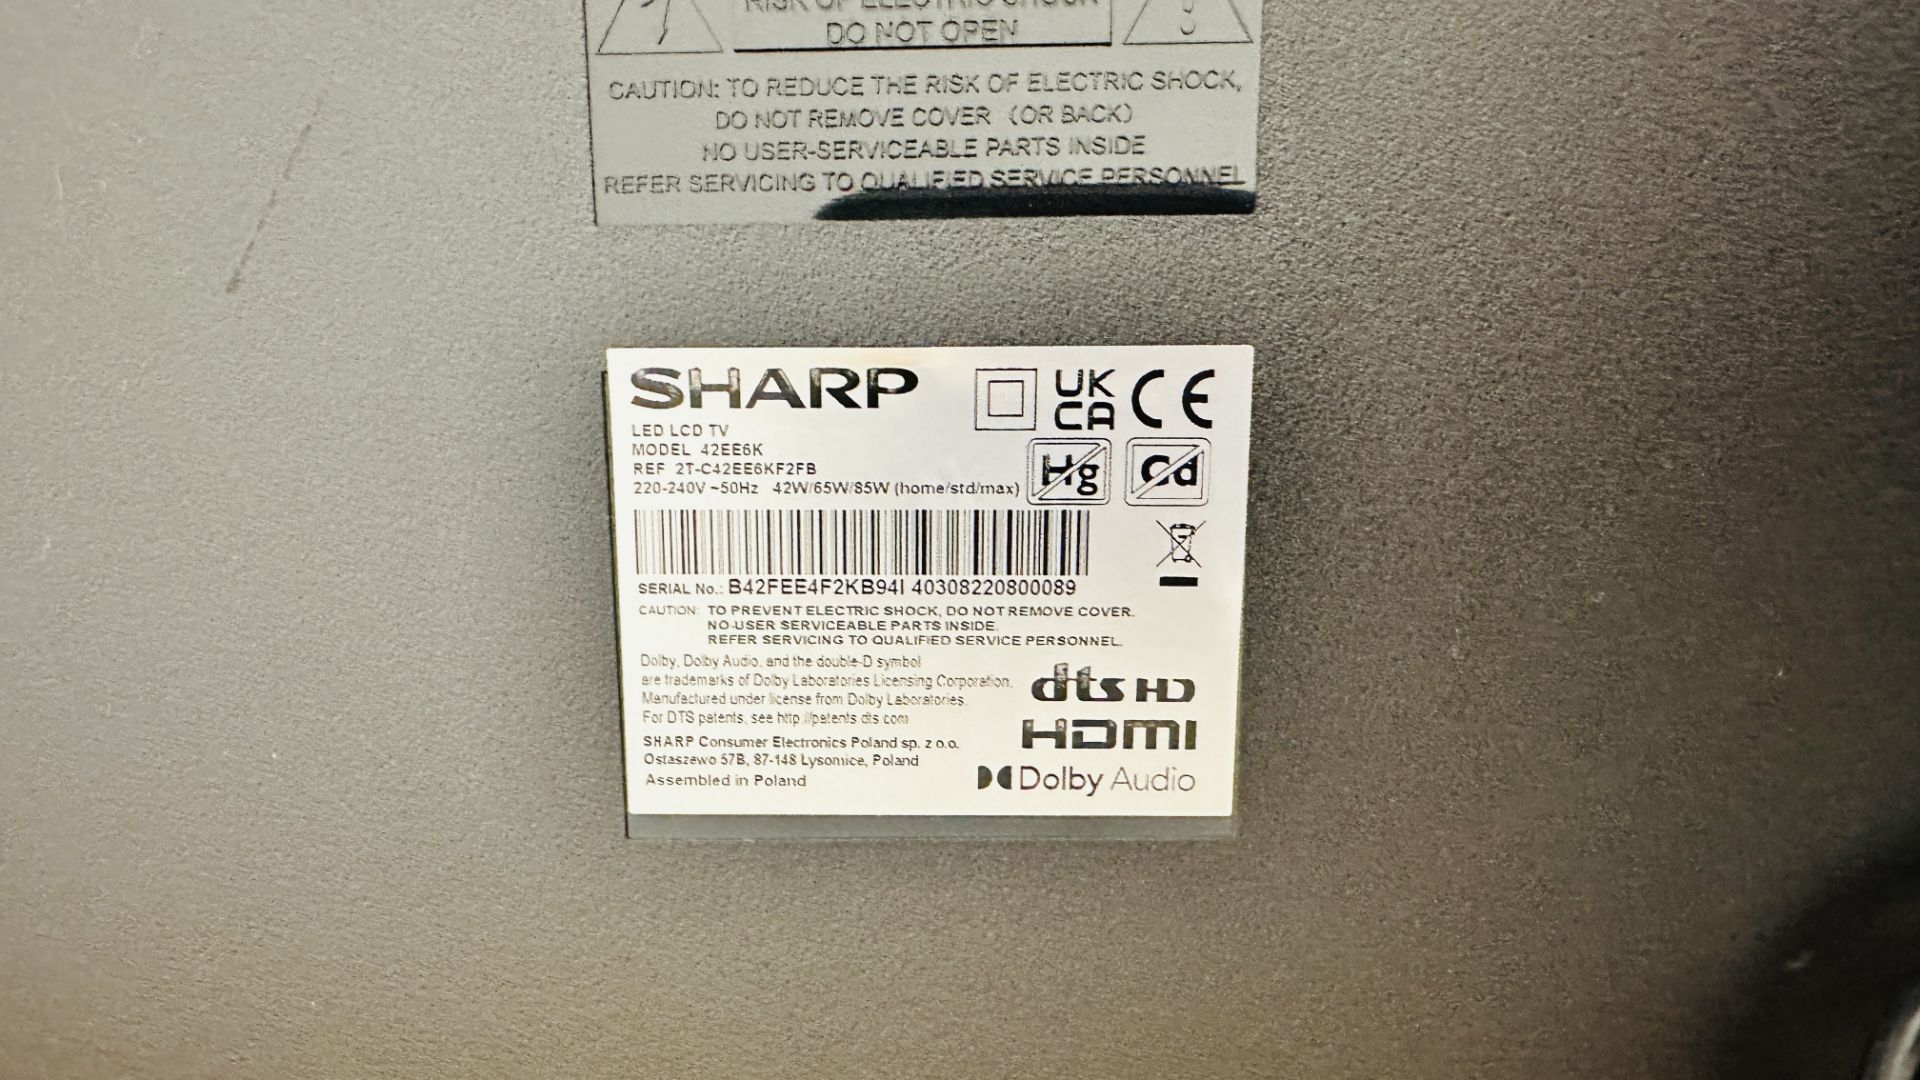 SHARP 42" FLAT SCREEN TV WITH REMOTE - SOLD AS SEEN. - Image 5 of 5